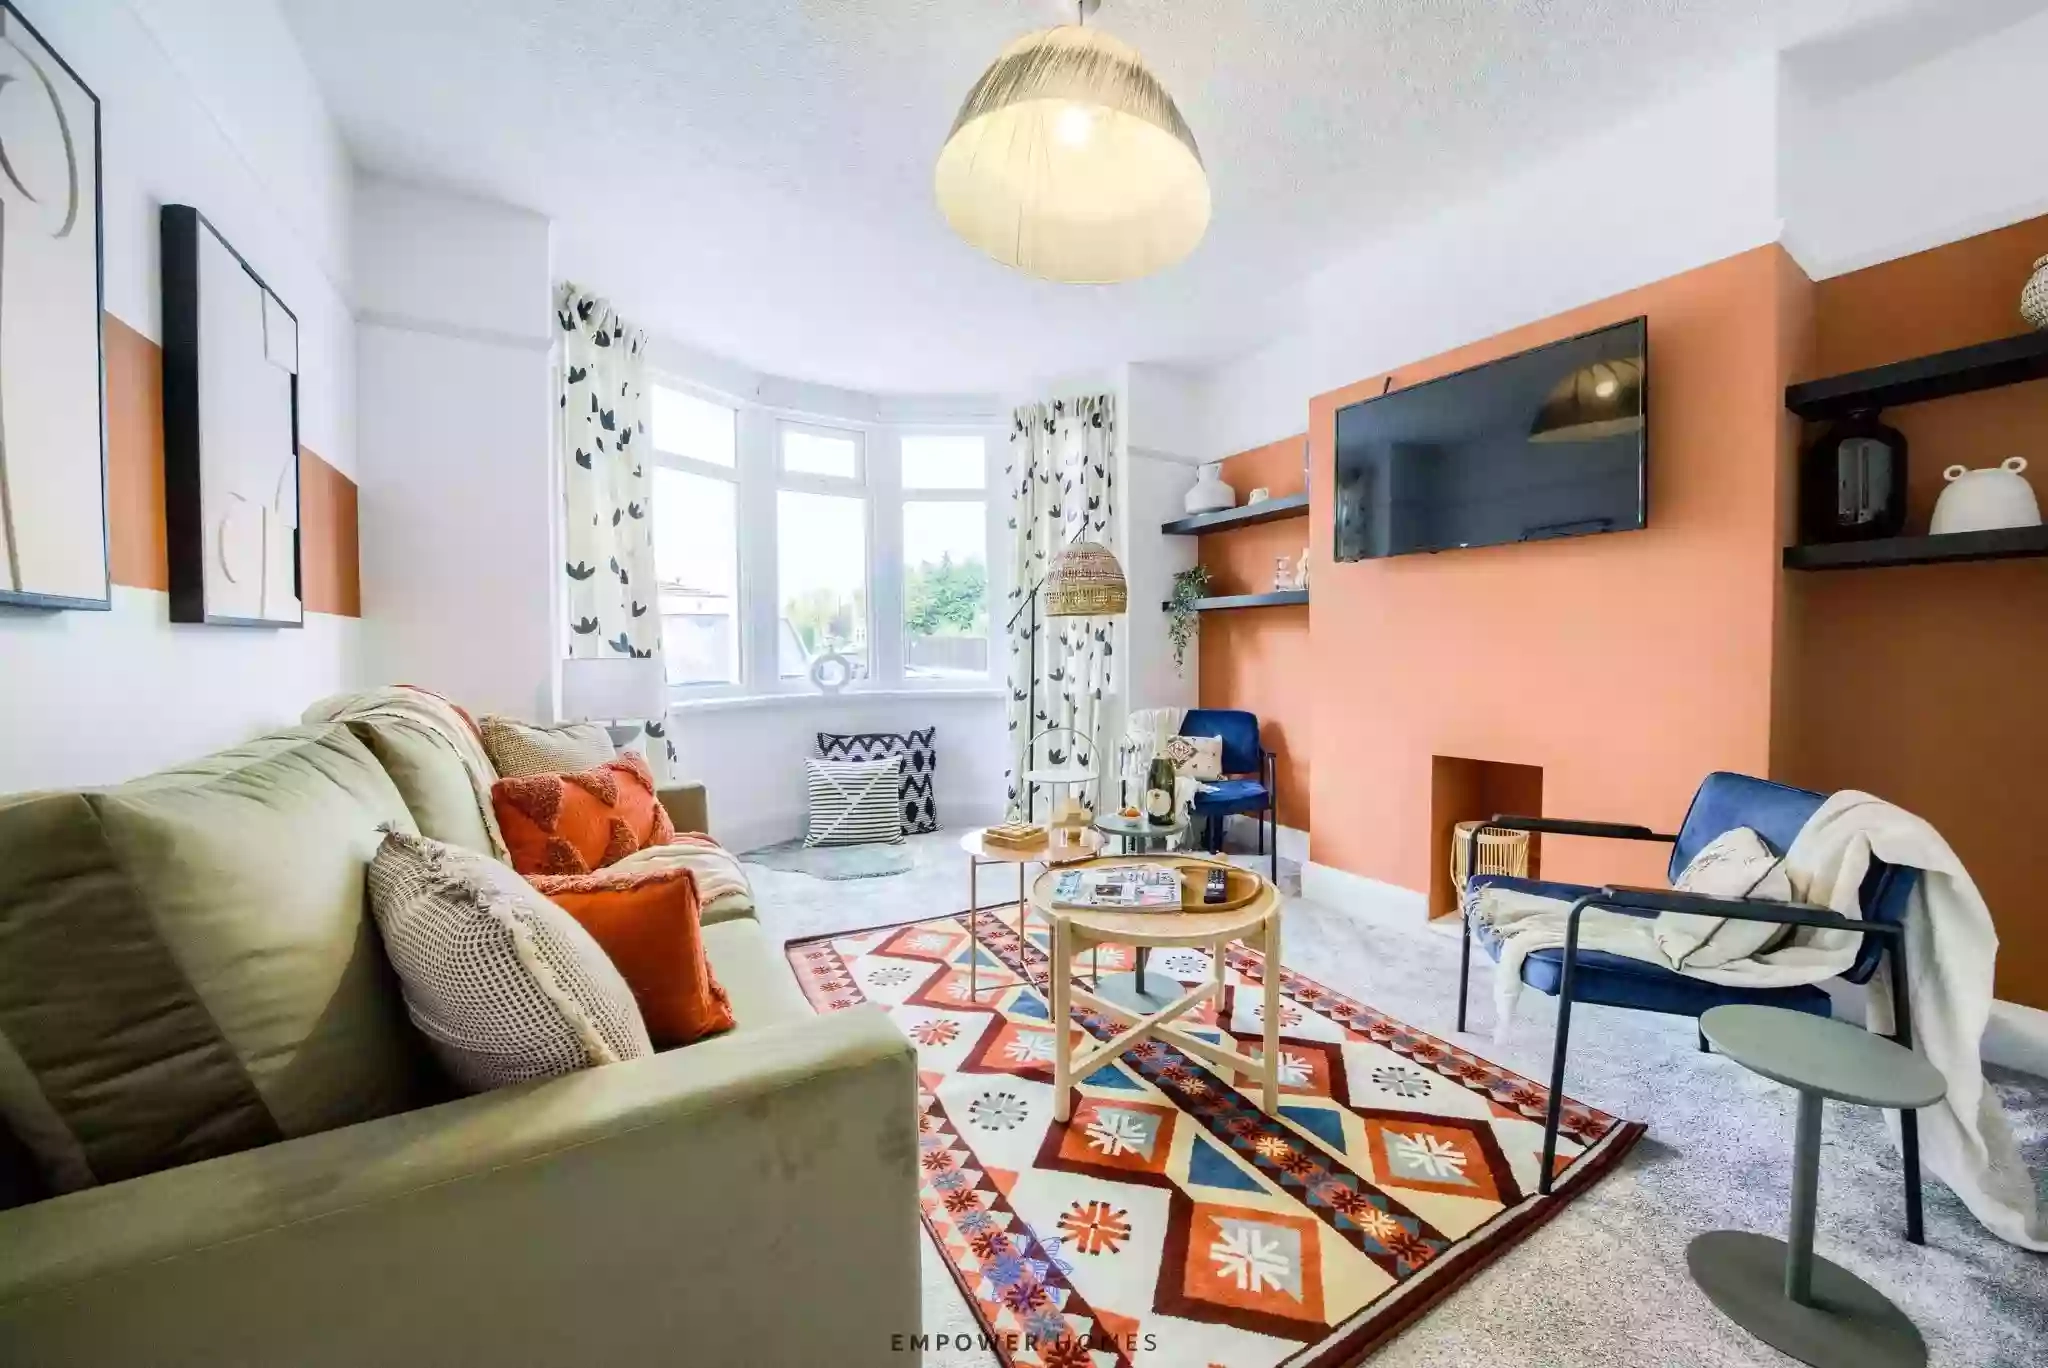 Coventry Beautiful House, University Hospital, M6 M69, Private Parking, Sleeps 6, by EMPOWER HOMES